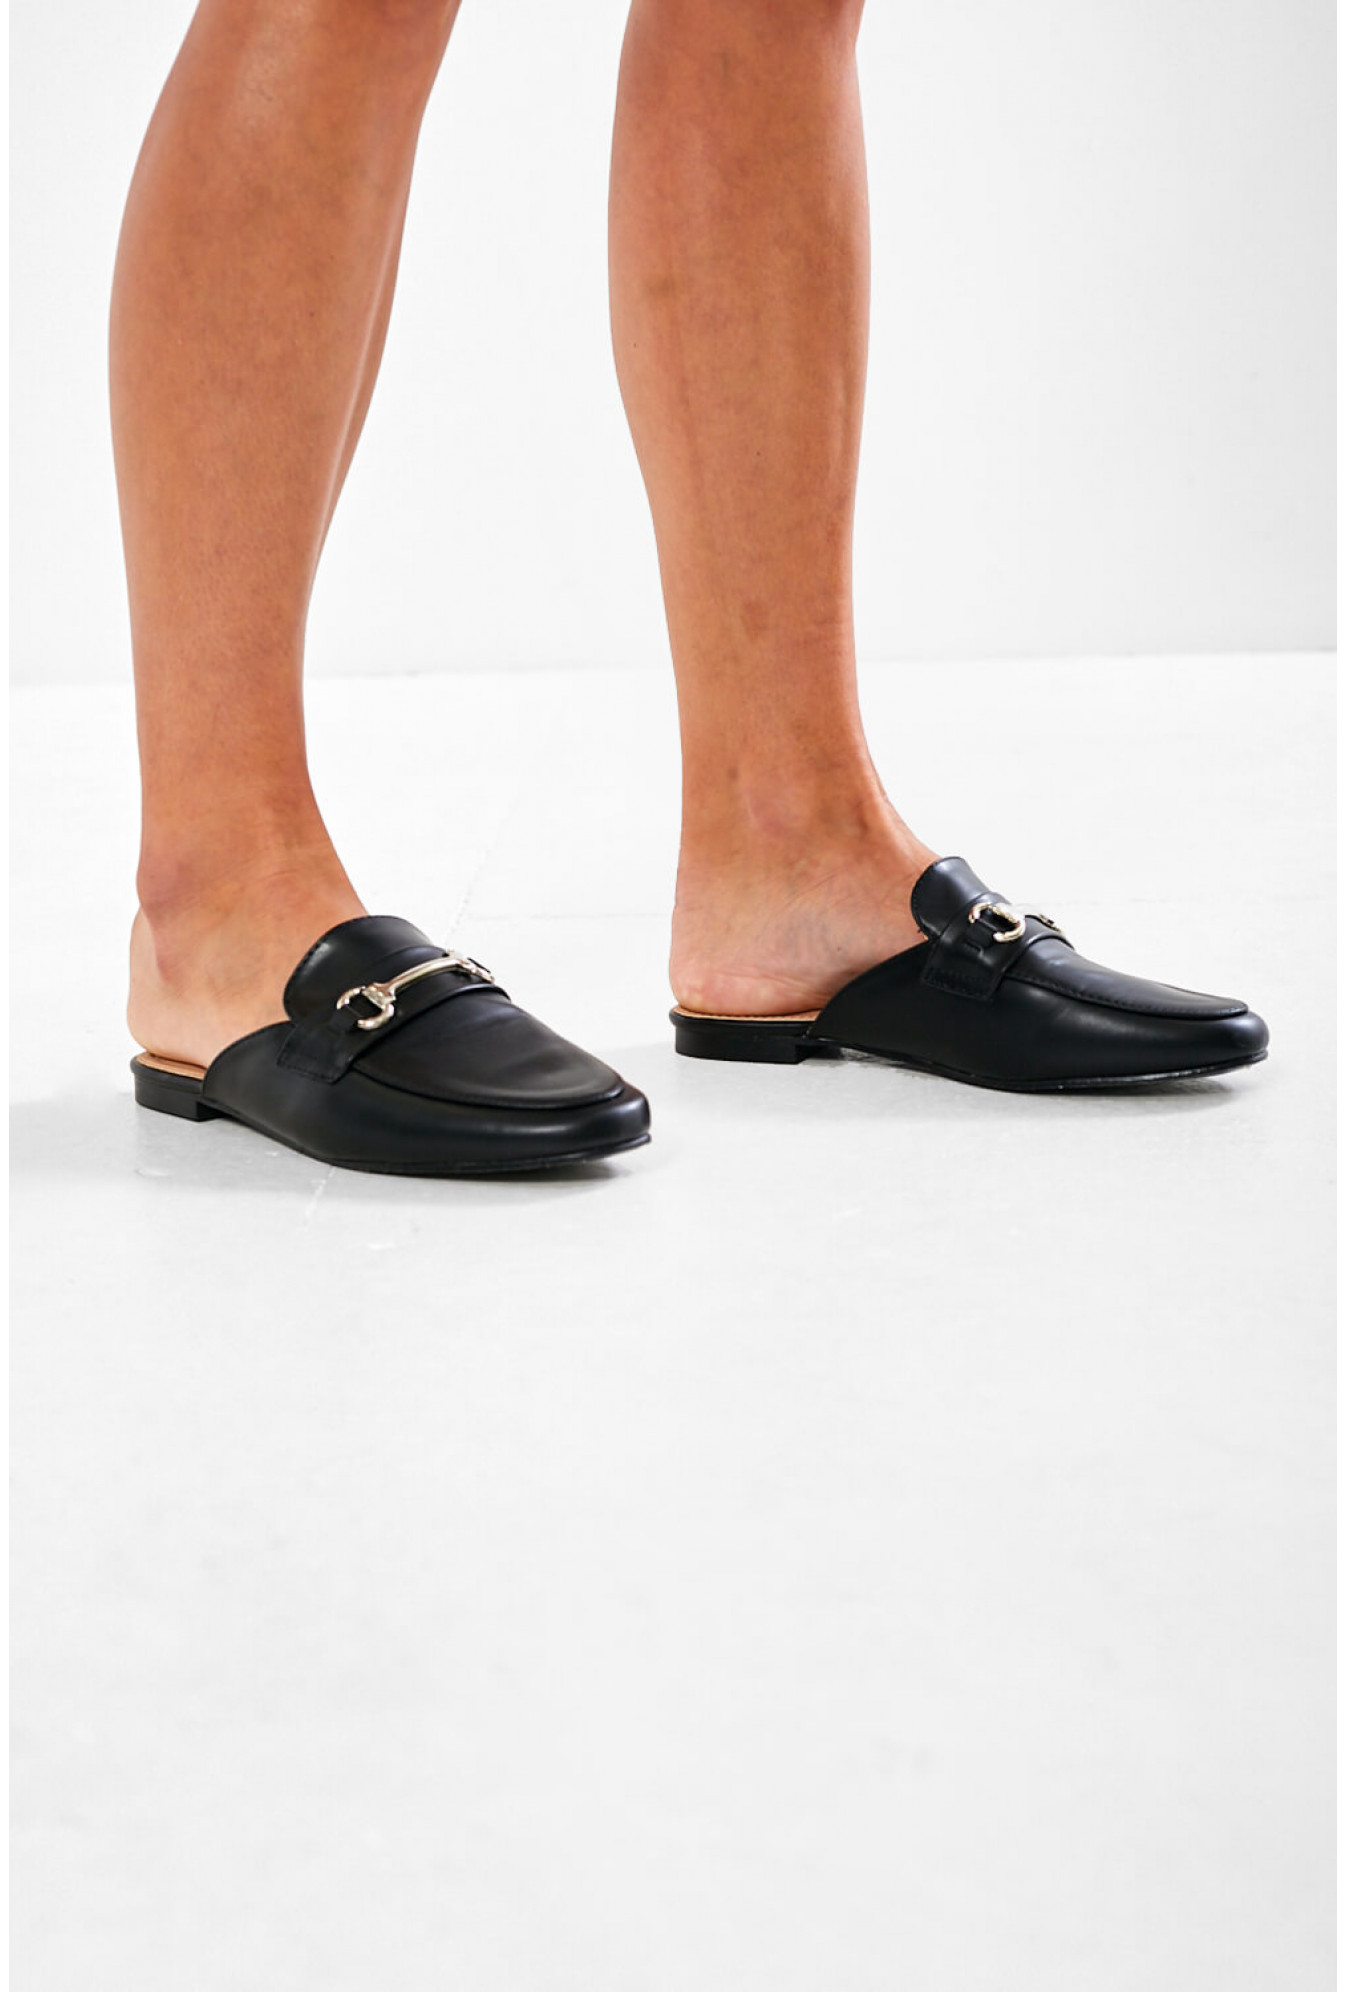 black loafers backless